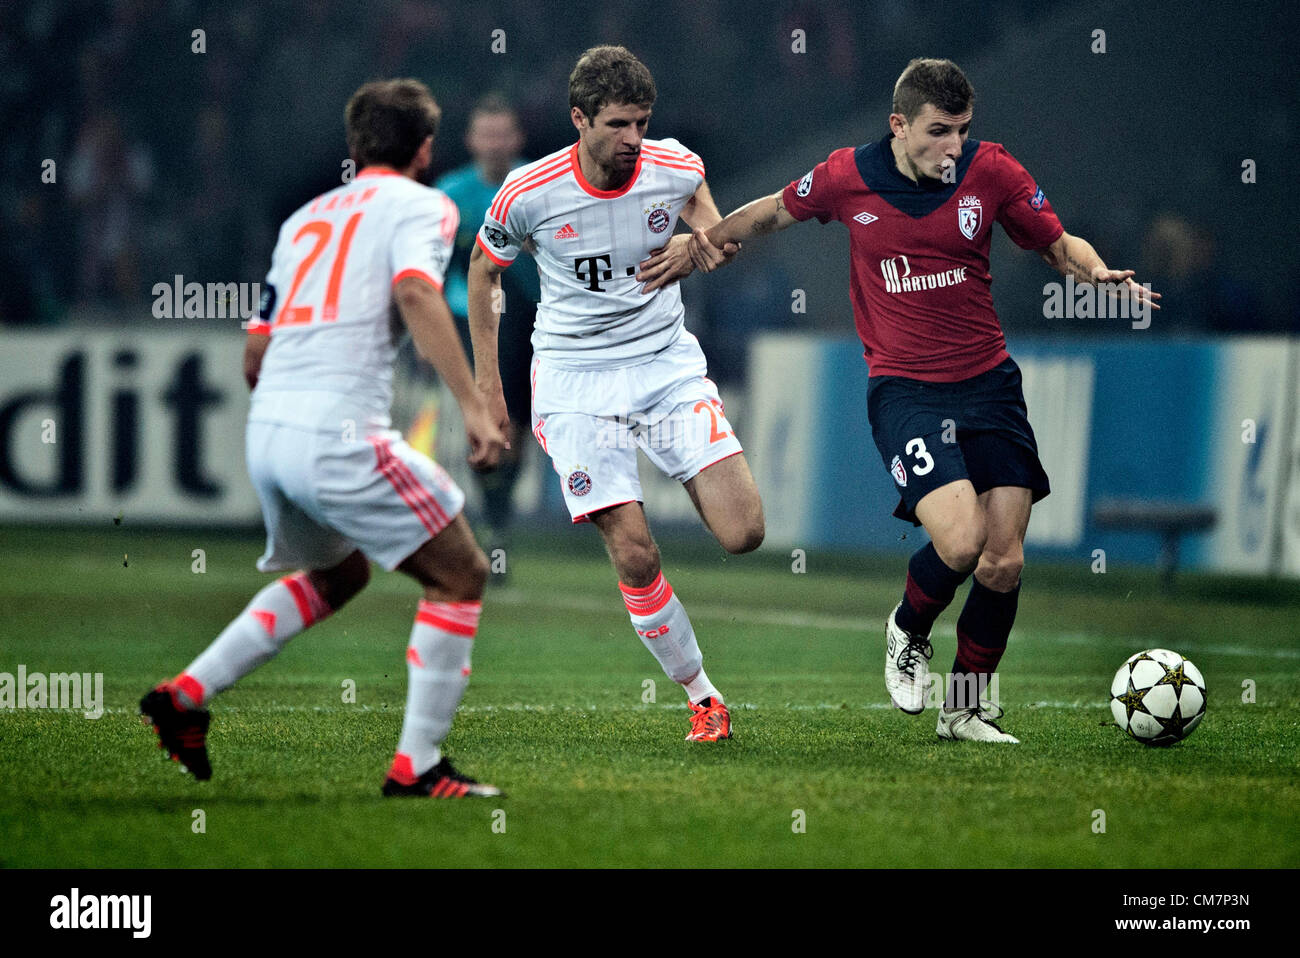 23.10.2012. Lille, France.  Munich's Thomas Mueller (C) runs with the ball against Lille's Lucas Digne (R) during the Champions League Group F soccer match between OSC Lille and FC Bayern Munich at the Grand Stade Lille Metropole in Lille, France. Stock Photo